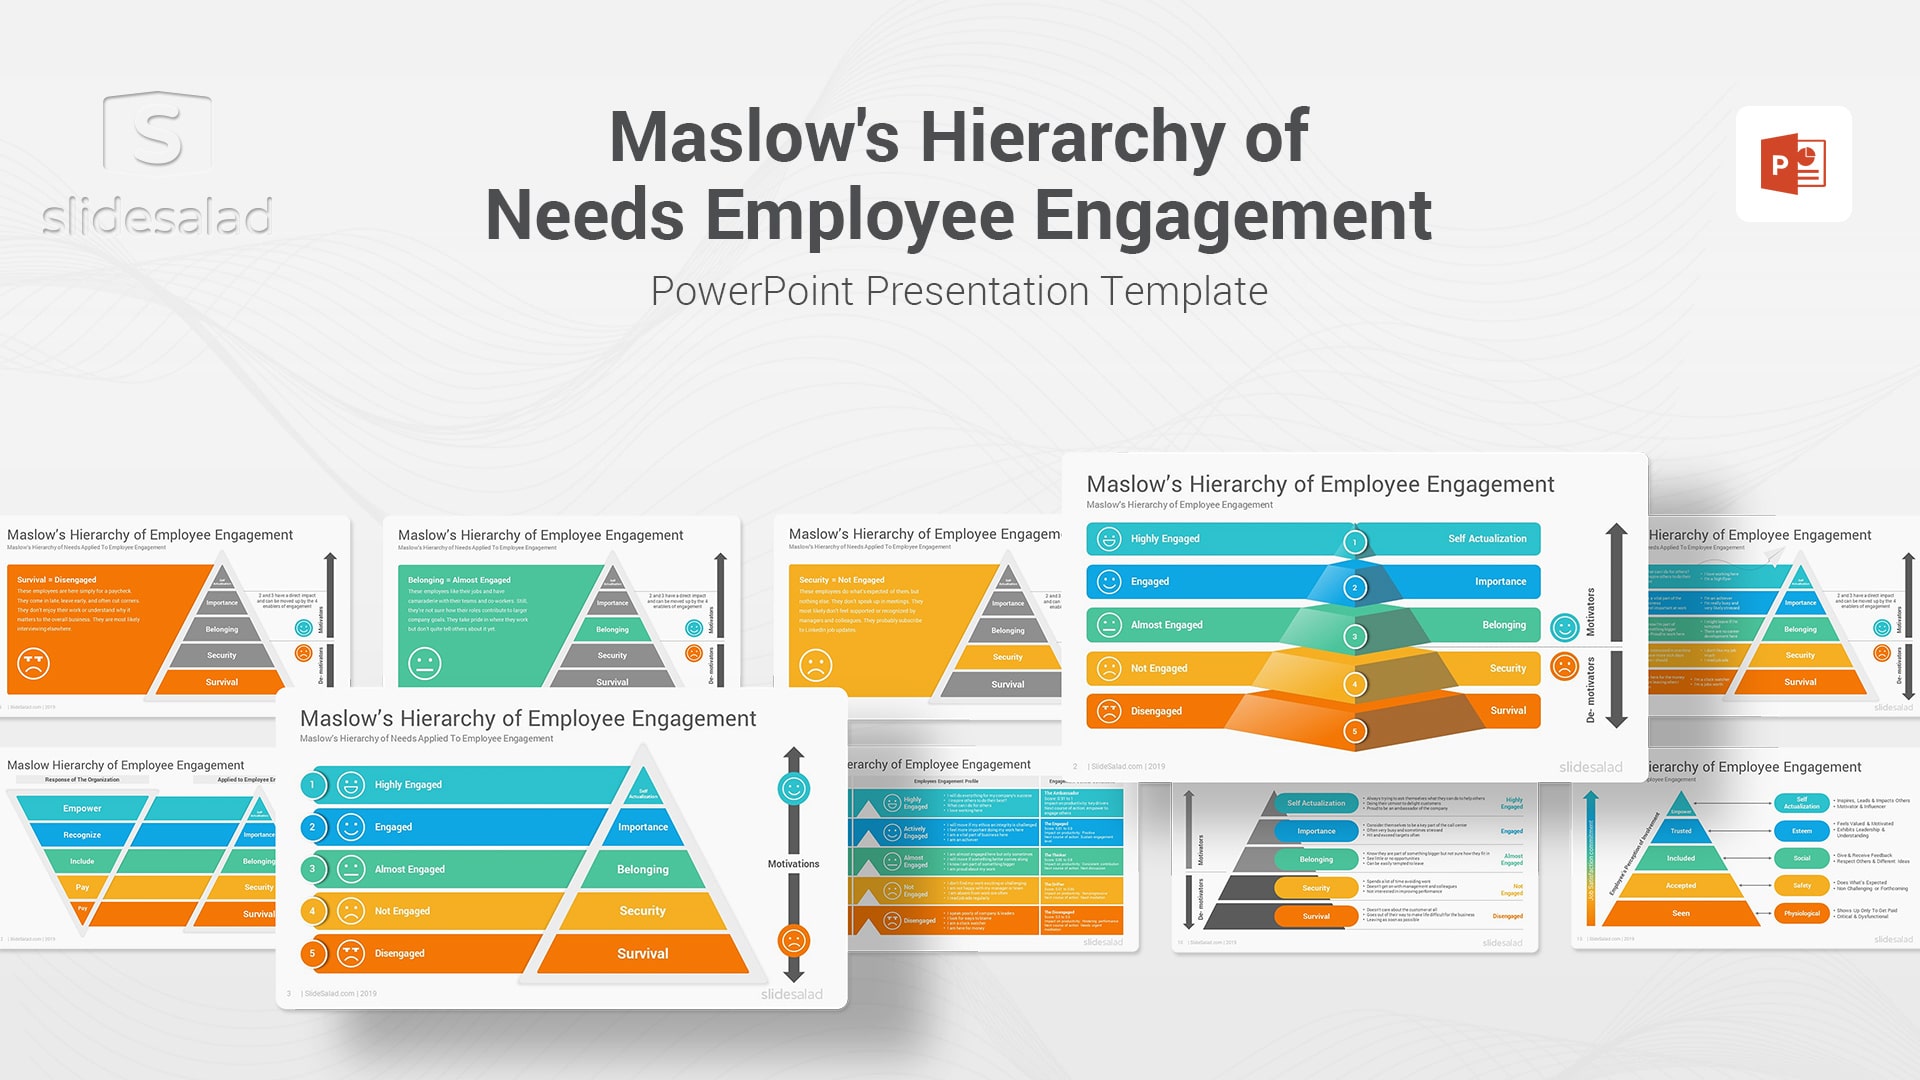 Maslow’s Hierarchy of Employee Engagement PowerPoint Template – Elegant Team Development Frameworks PowerPoint Template